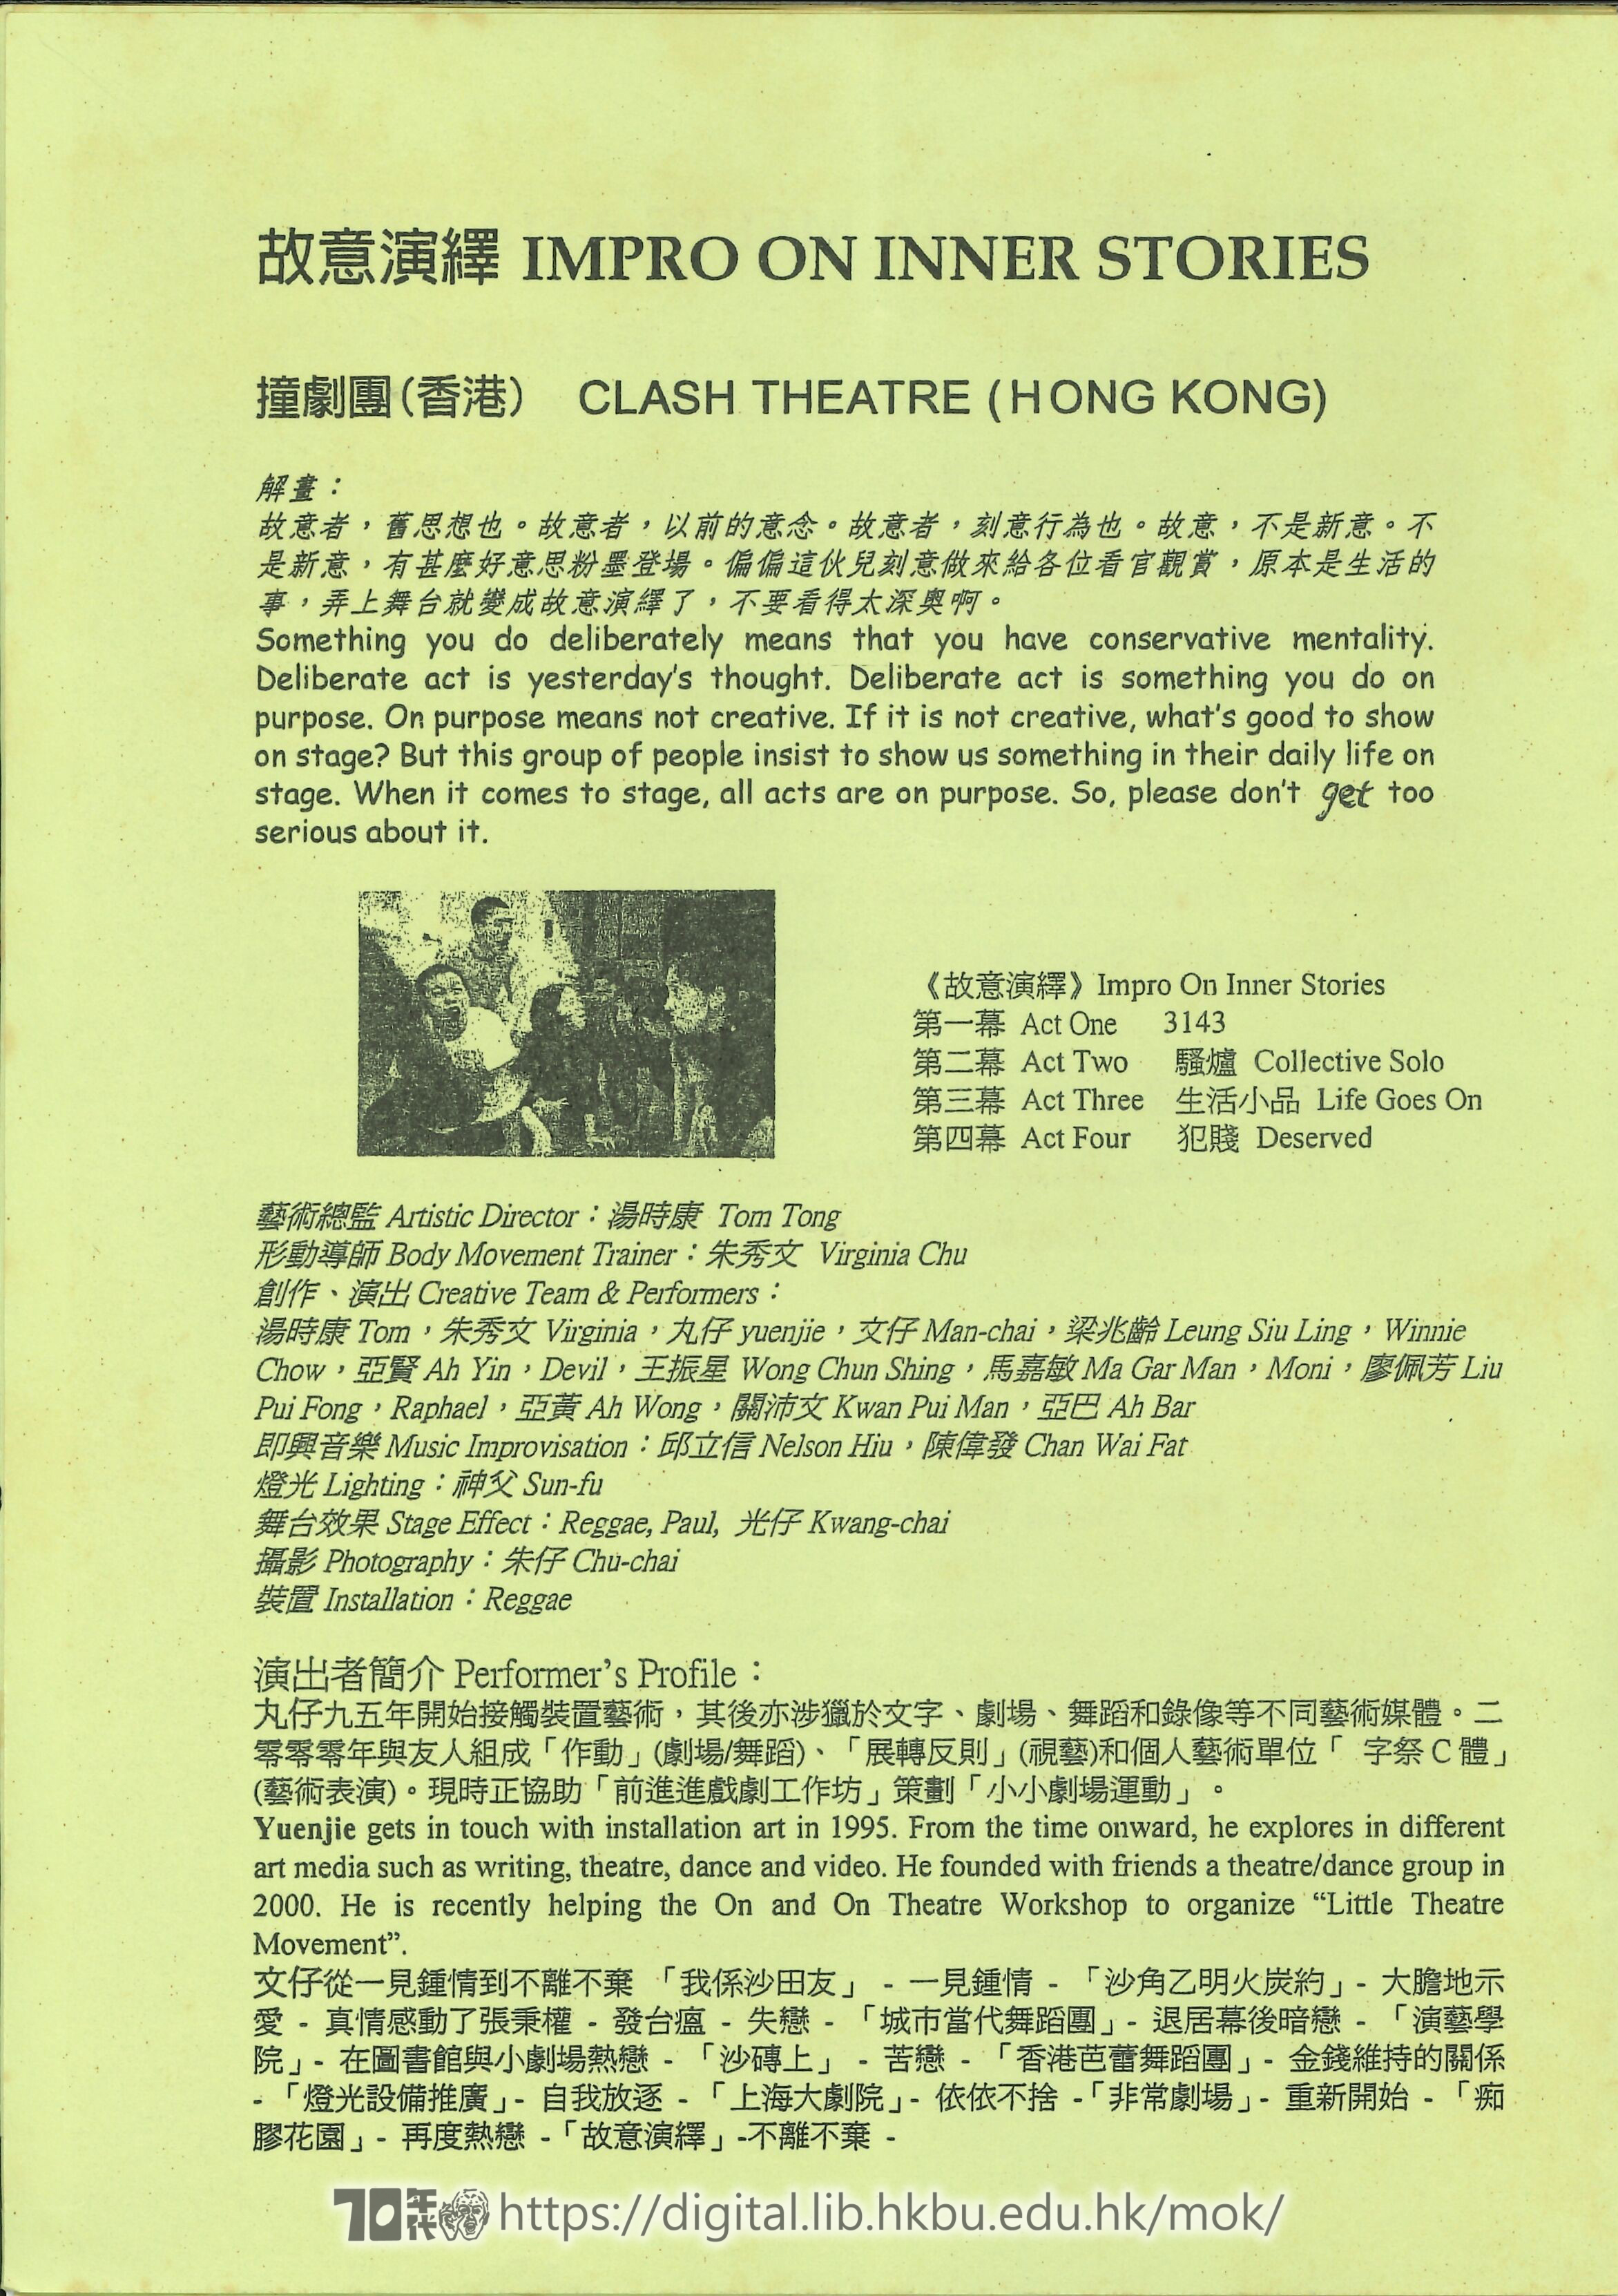 Community theatre  House programme of Asia Meets Asia 2001 - schedule and introduction  